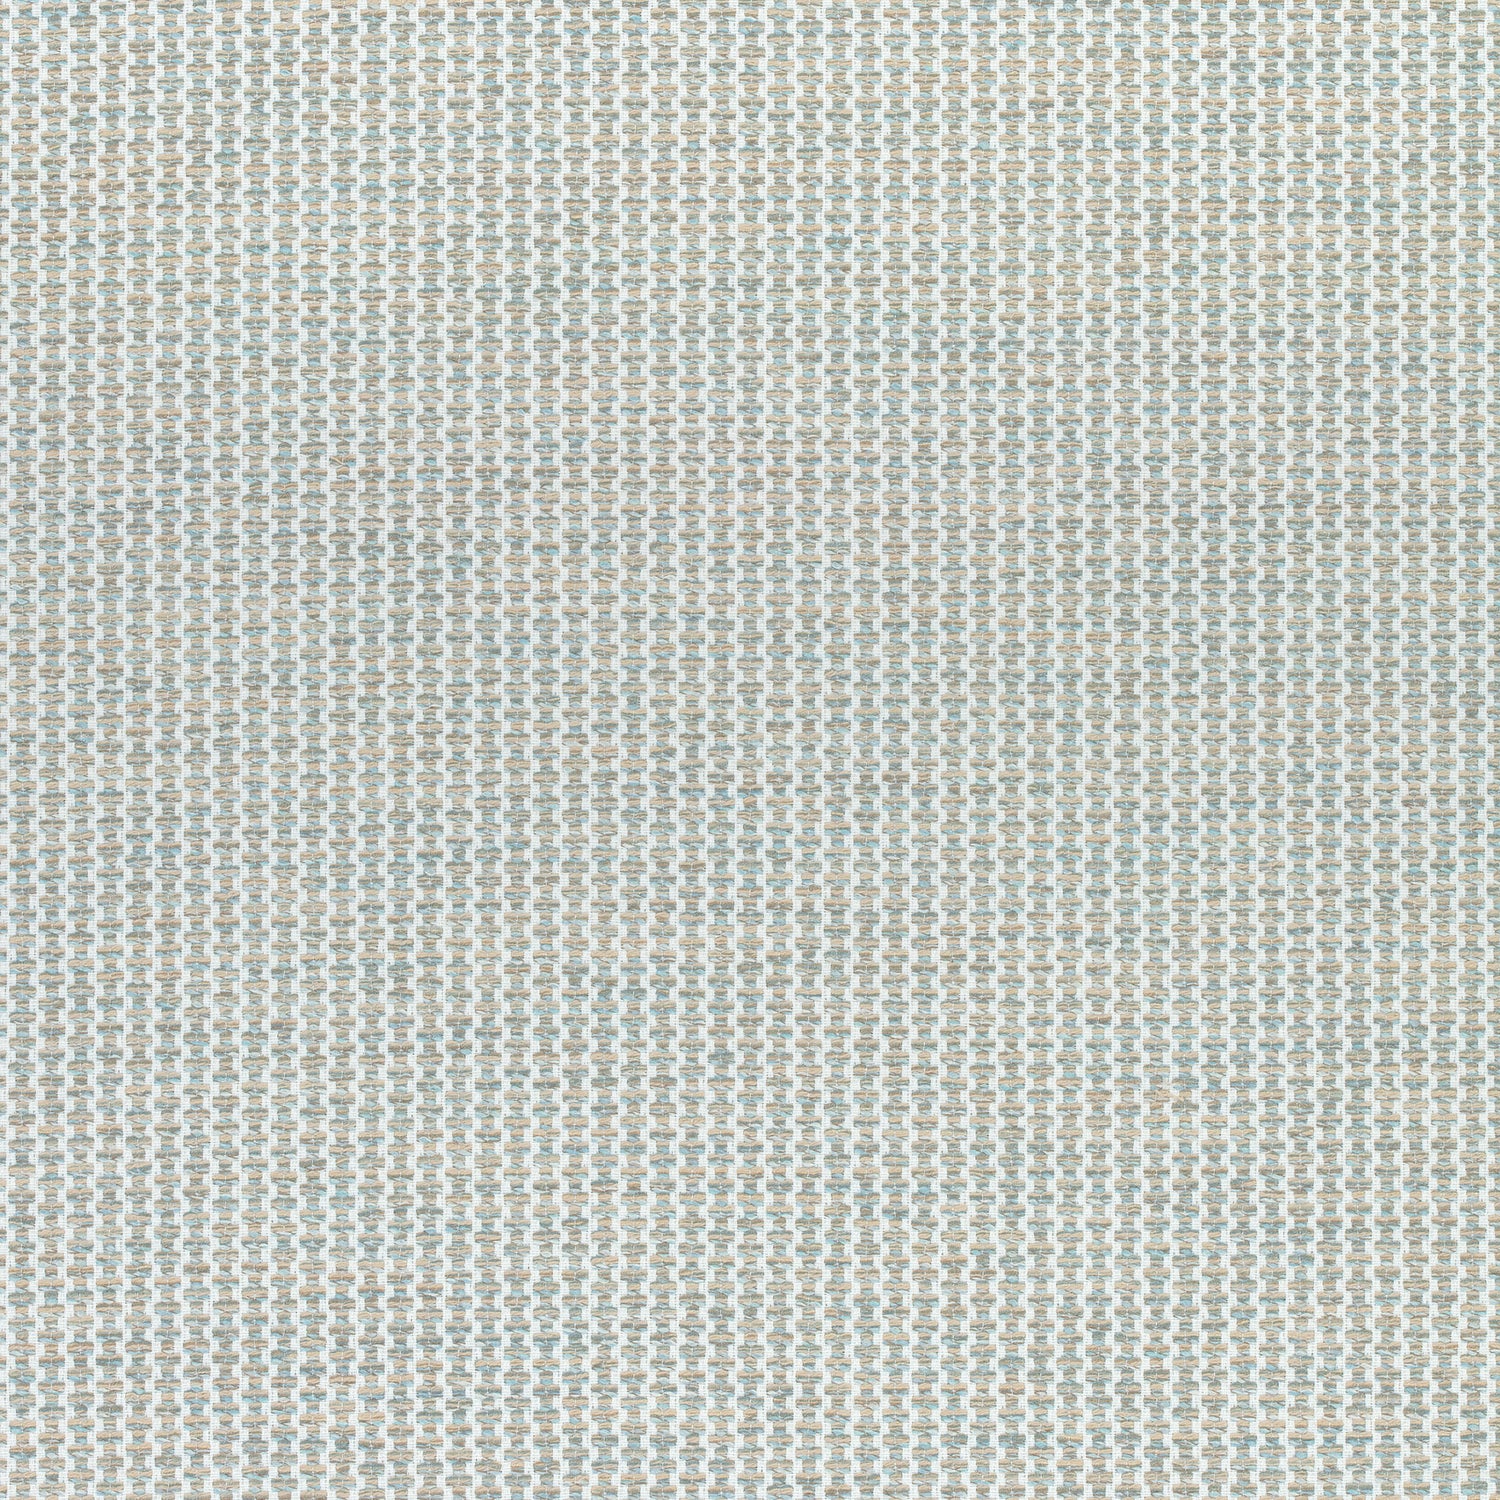 Ryder fabric in aqua color - pattern number W74090 - by Thibaut in the Cadence collection